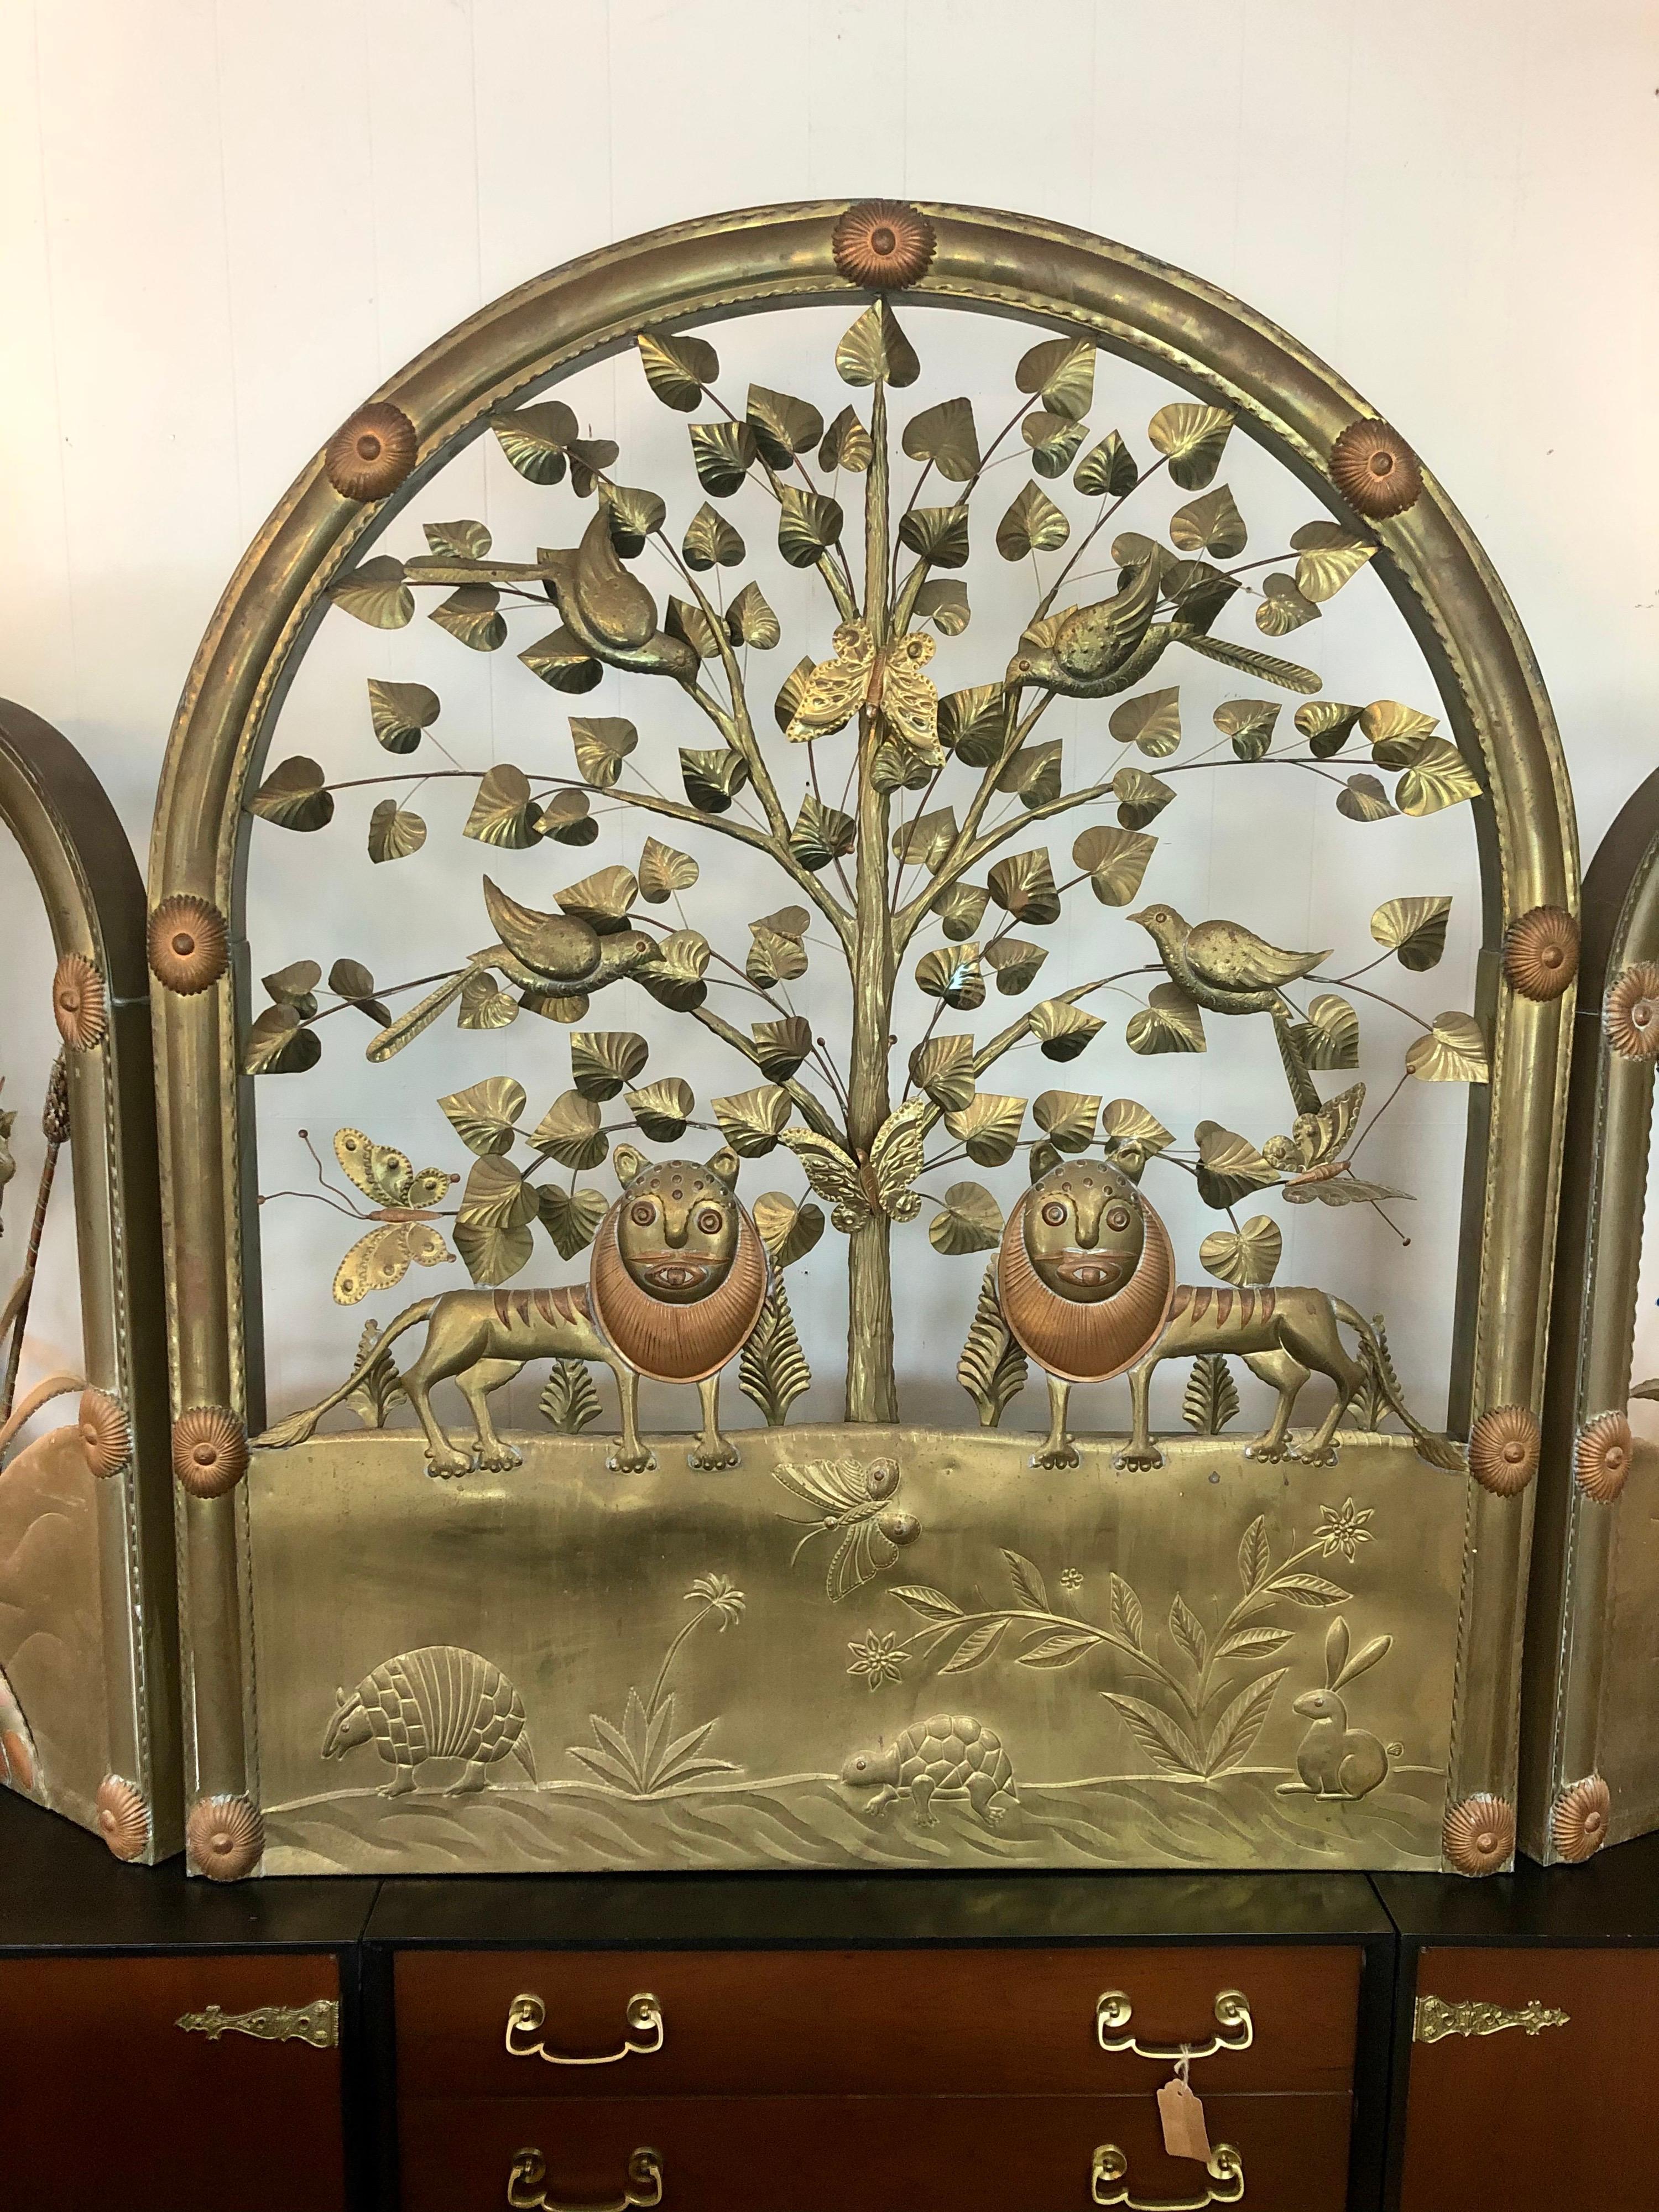 Designed by Sergio Bustamante, this folding screen is in overall good condition. Made of brass and copper. Animal motif throughout. One giraffe missing an ossicone (See Photos). 
circa 1970s. Mexico.
Dimensions:
84